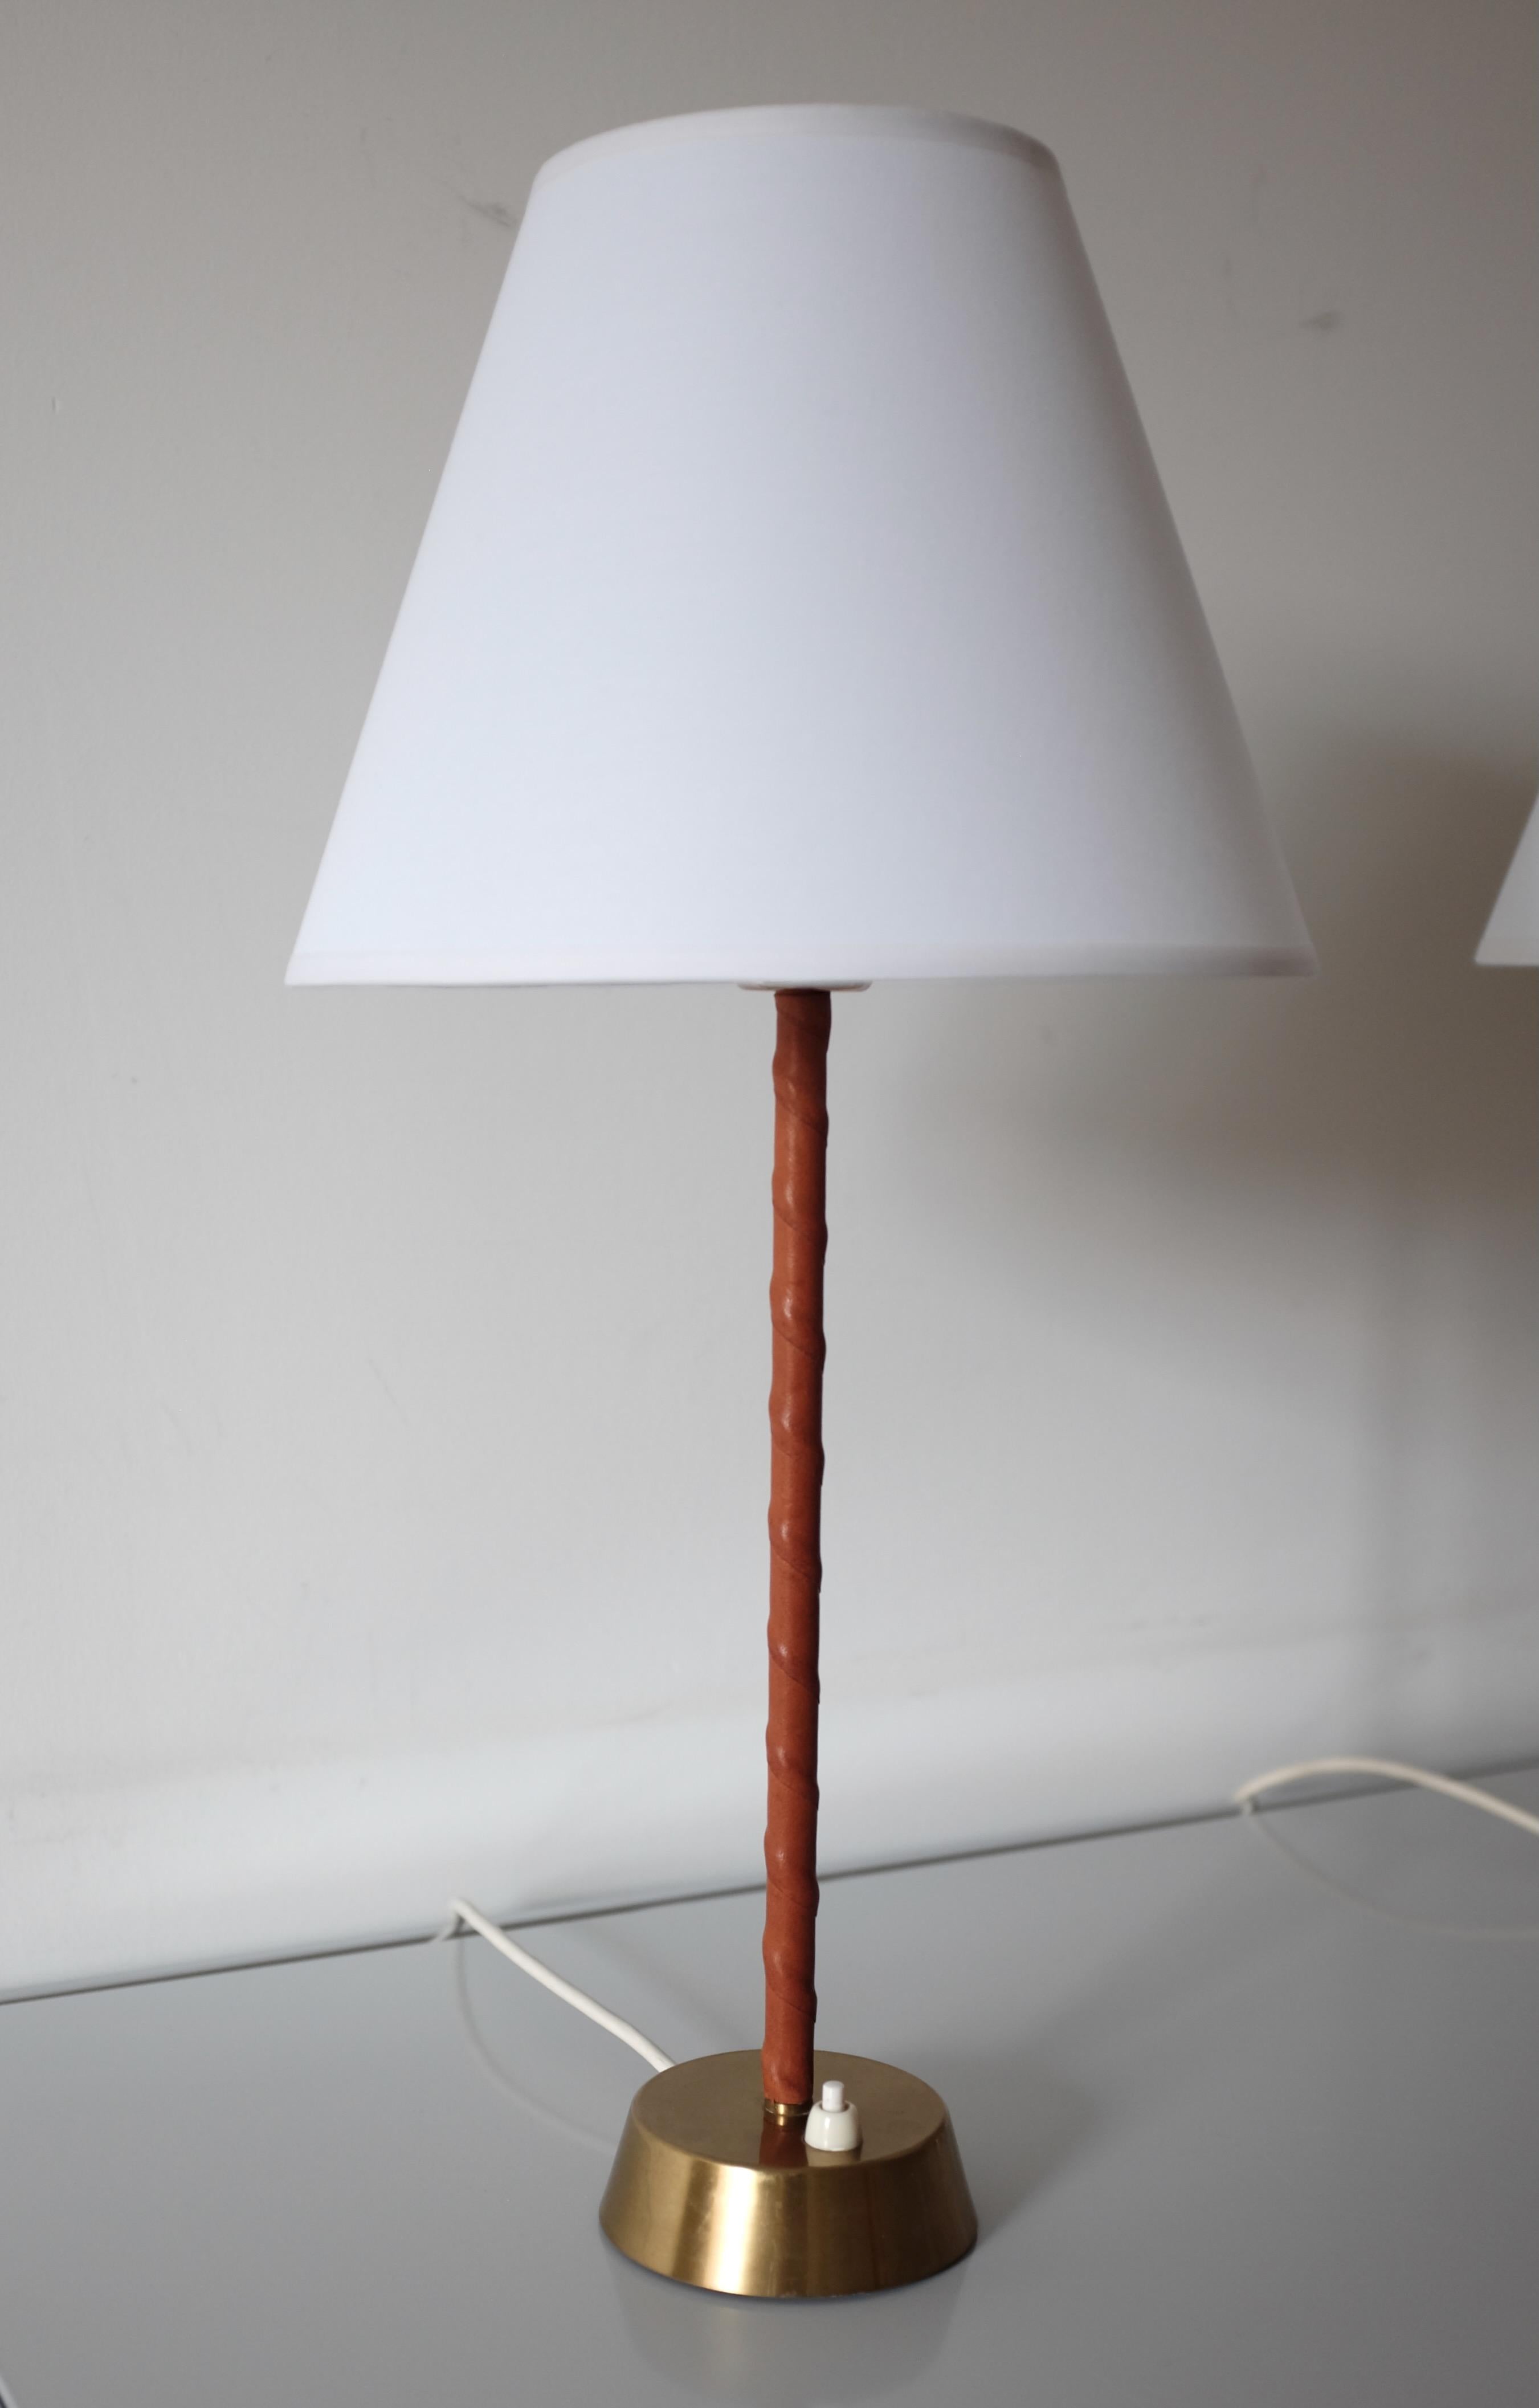 Pair of Swedish midcentury Table lamps by ASEA Skandia. Brass lampfot and leather covered lamparm with new white linen lampshades. Stamped with Model number 116 underneath with makers name. Very good working condition with age appropriate wear to